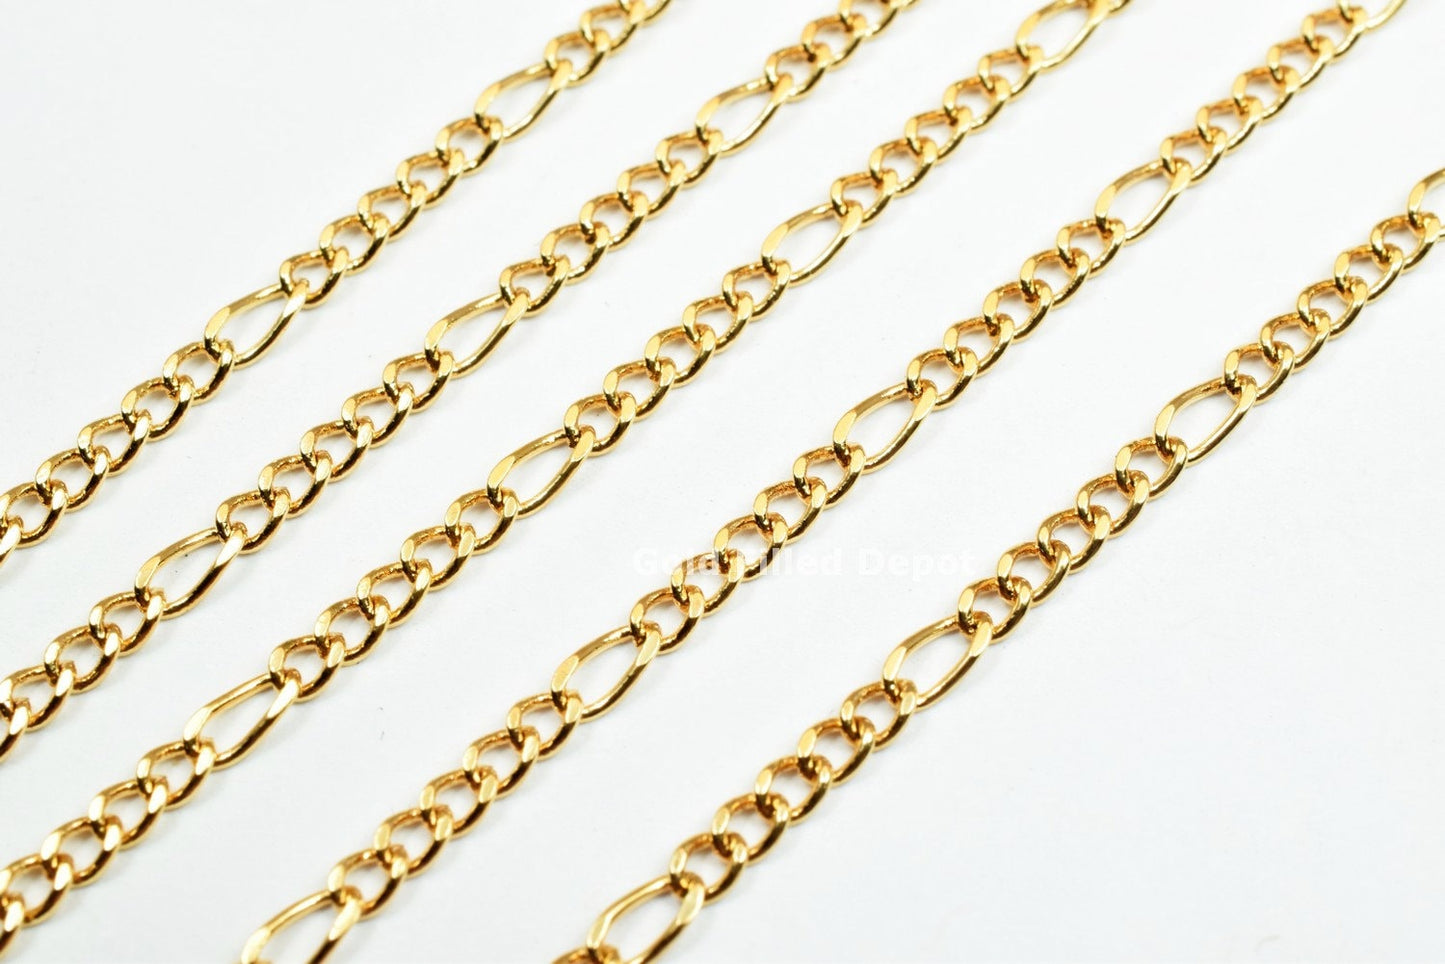 3 Foots 18K Gold Filled Chain Cable Link Chain Width 2mm Thickness 0.5mm Gold-Filled finding for Gold Filled Jewelry Making GFC013